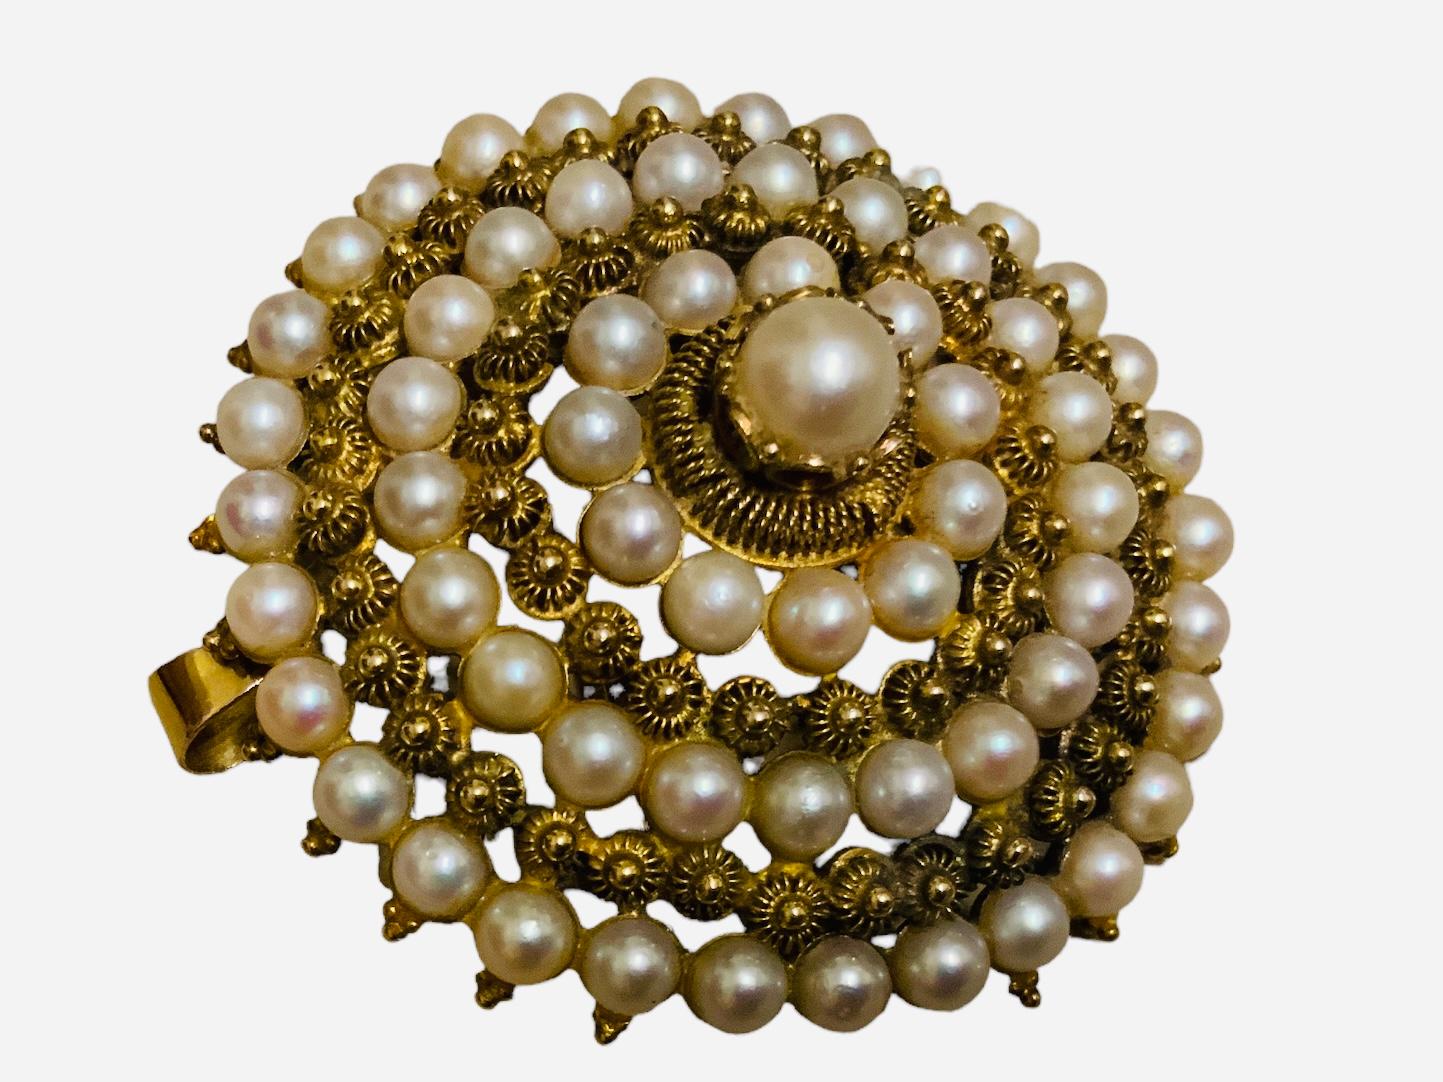 This is a Victorian style 14K yellow gold and pearls brooch/pendant. It is a round brooch decorated with smaller to larger circles made of cannetilles and pearls. The top of the brooch is crowned with a larger pearl in prong setting. The brooch has